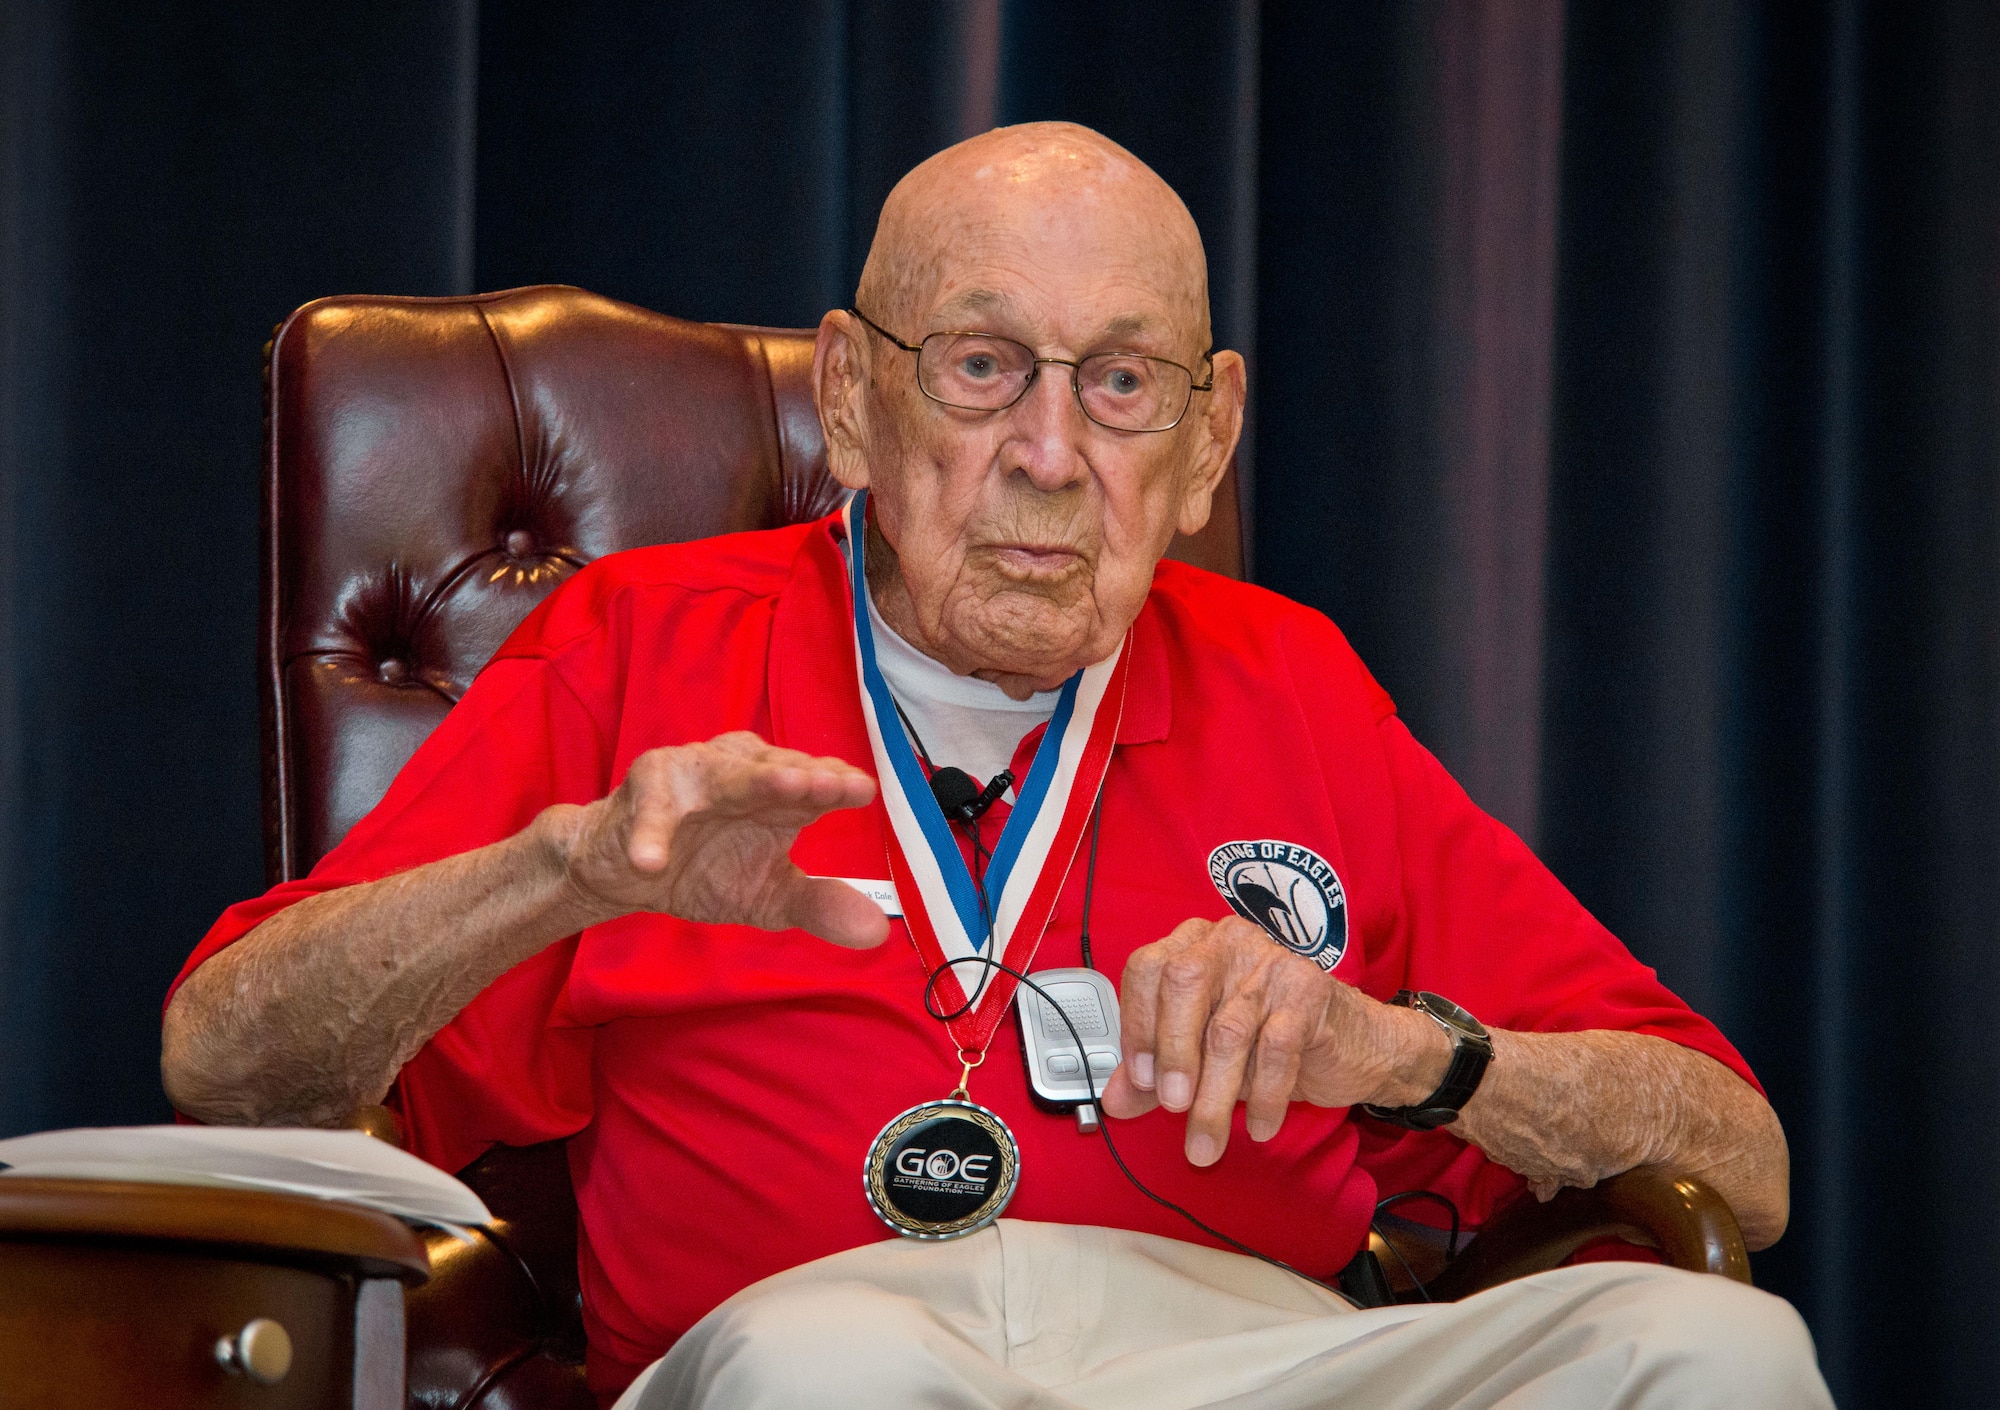 Retired United States Army Lt. Col. Richard Cole, 2016 Gathering of Eagles honoree, speaks of his time as Jimmy Doolittle’s copilot on the first bomber to launch from the USS Hornet after Pearl Harbor attacks, during the Air Command and Staff College’s 2016 Gathering of Eagles event, May 31, 2016, Maxwell Air Force Base, Ala. In 1943, he took part in Operation THURSDAY, the first Allied all-aerial invasion. (U.S. Air Force photo/ Donna Burnett)